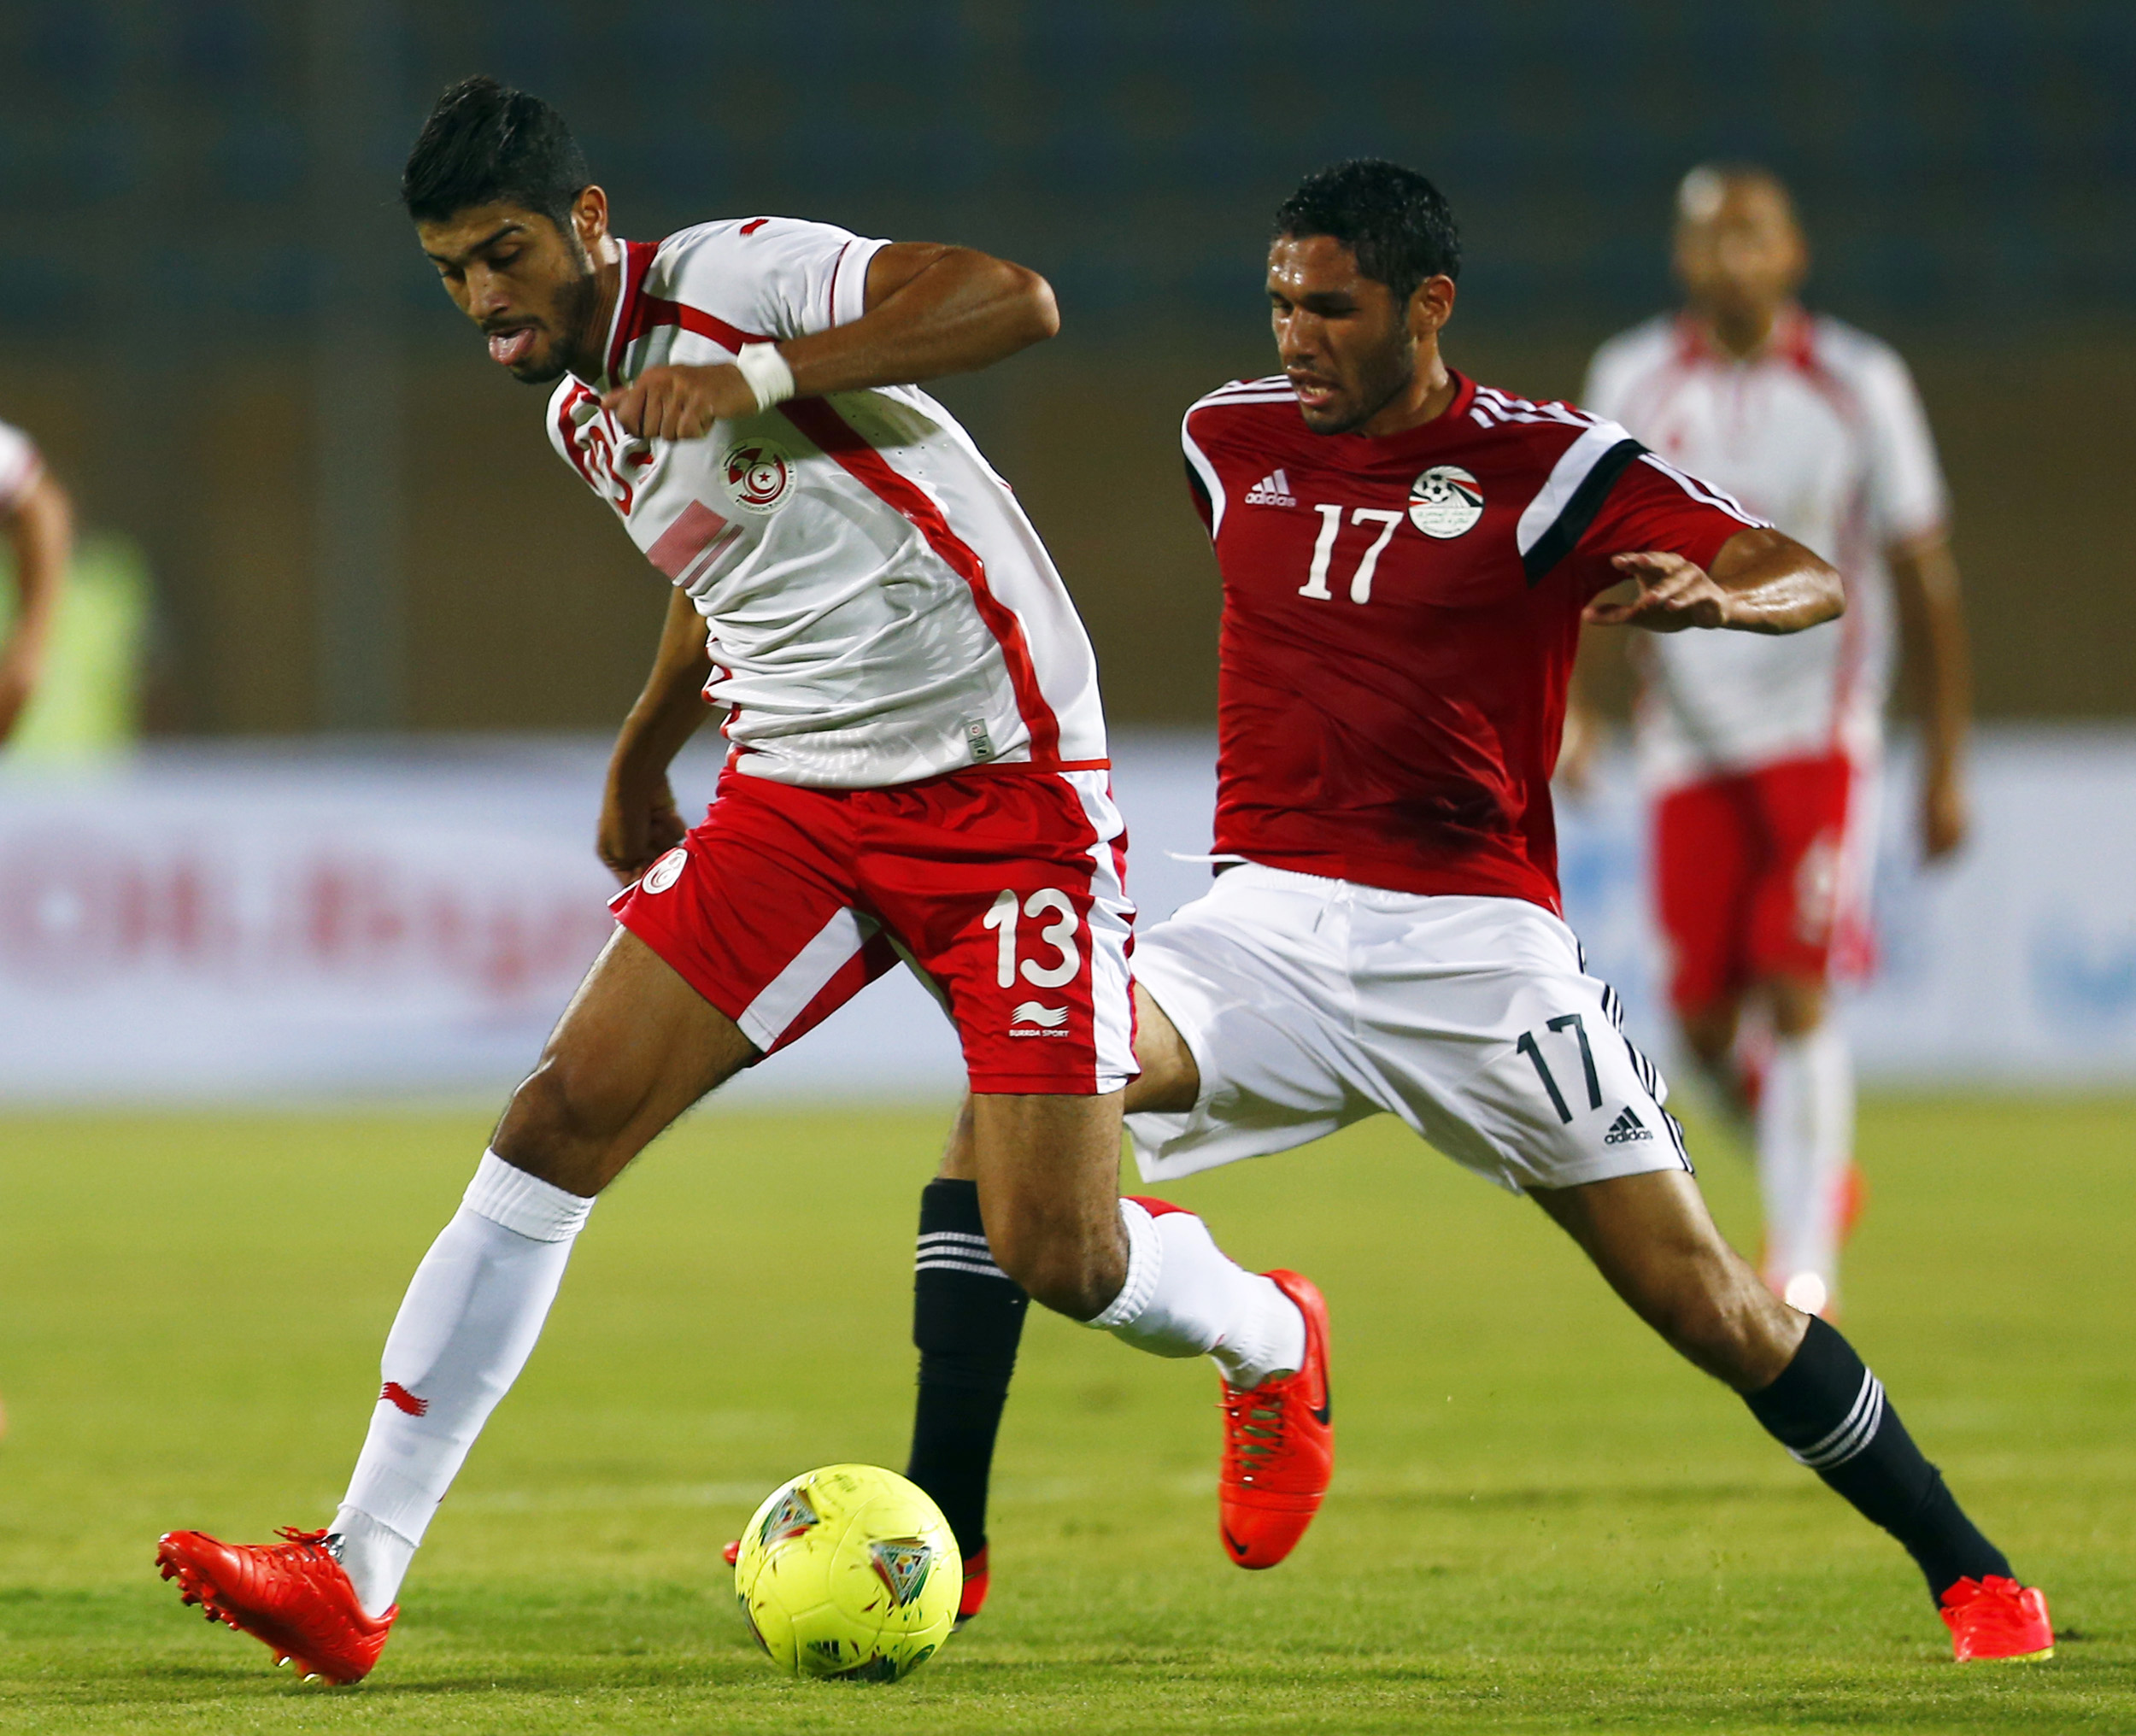 Limited number of spectators to attend Egyptian league matches